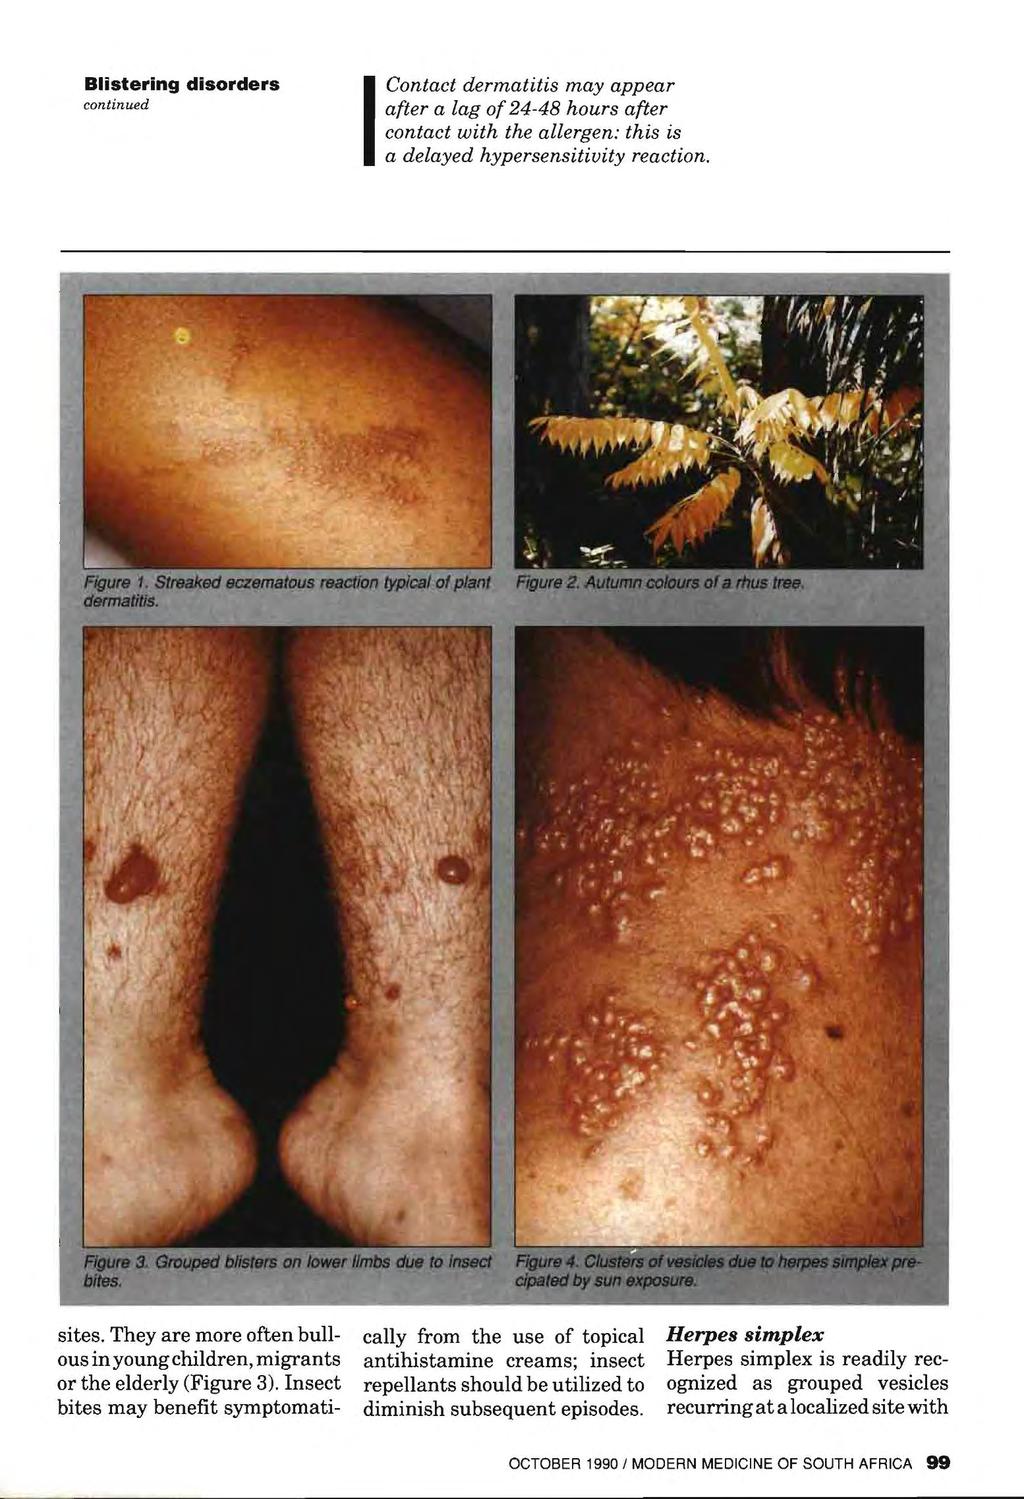 continued Contact dermatitis may appear af t e r a [ a g 0f 24-48 hours after contact with the allergen: this is a delayed hypersensitivity reaction. Figure 3.